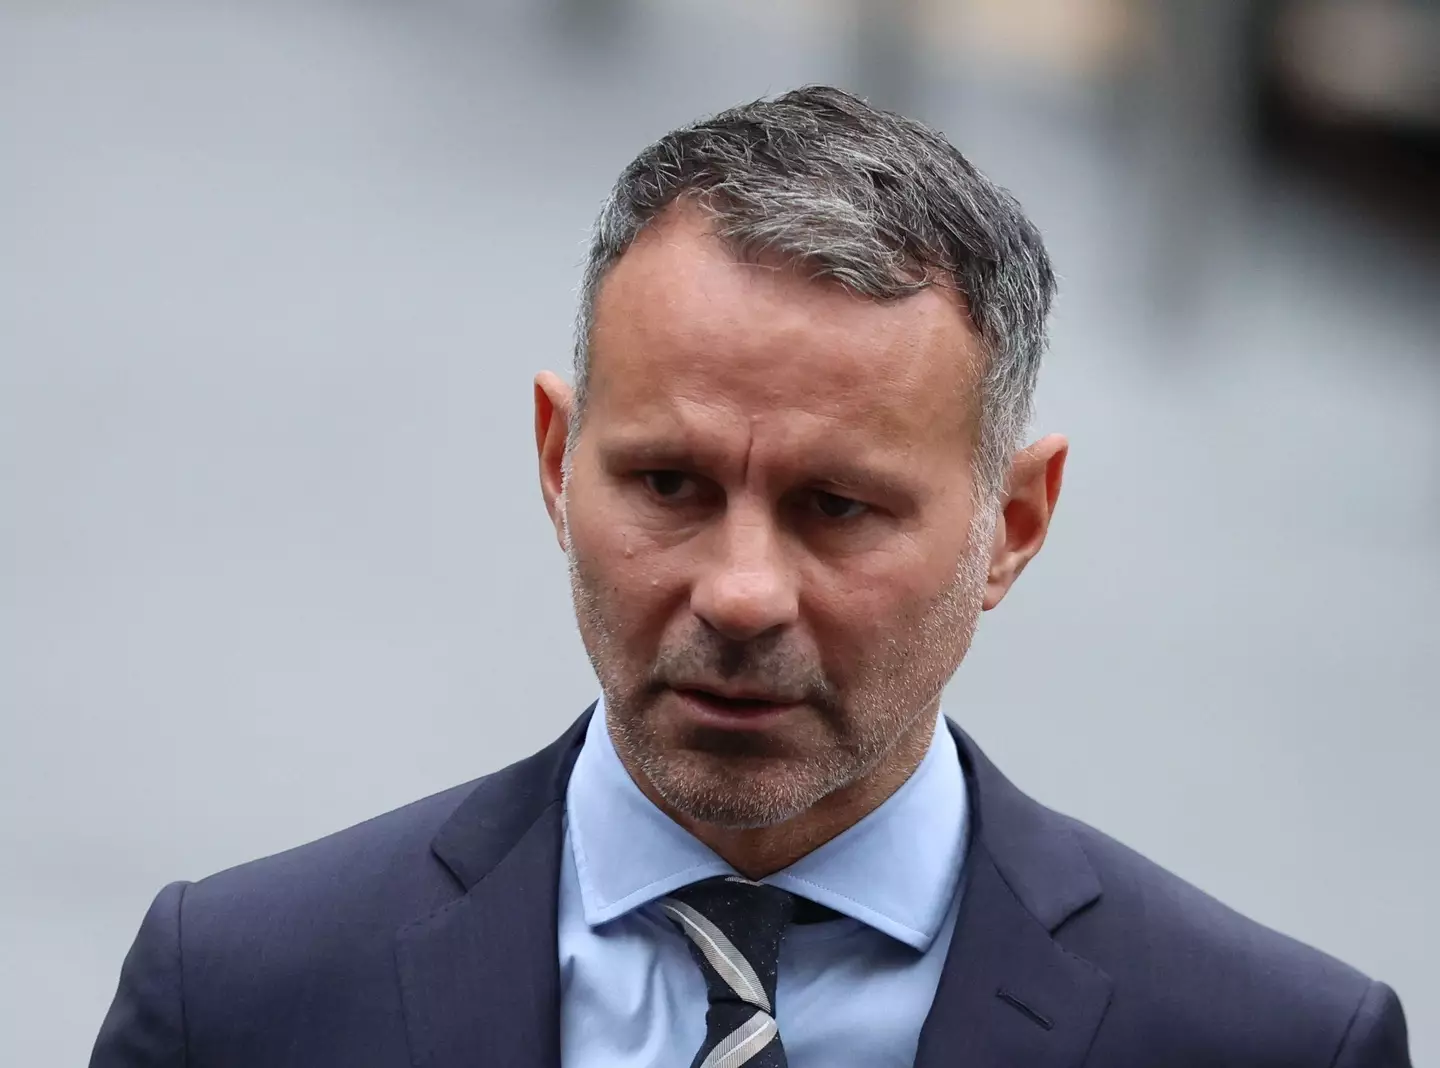 Giggs denied the allegations against him, pleading not guilty to all charges (Image: Alamy)